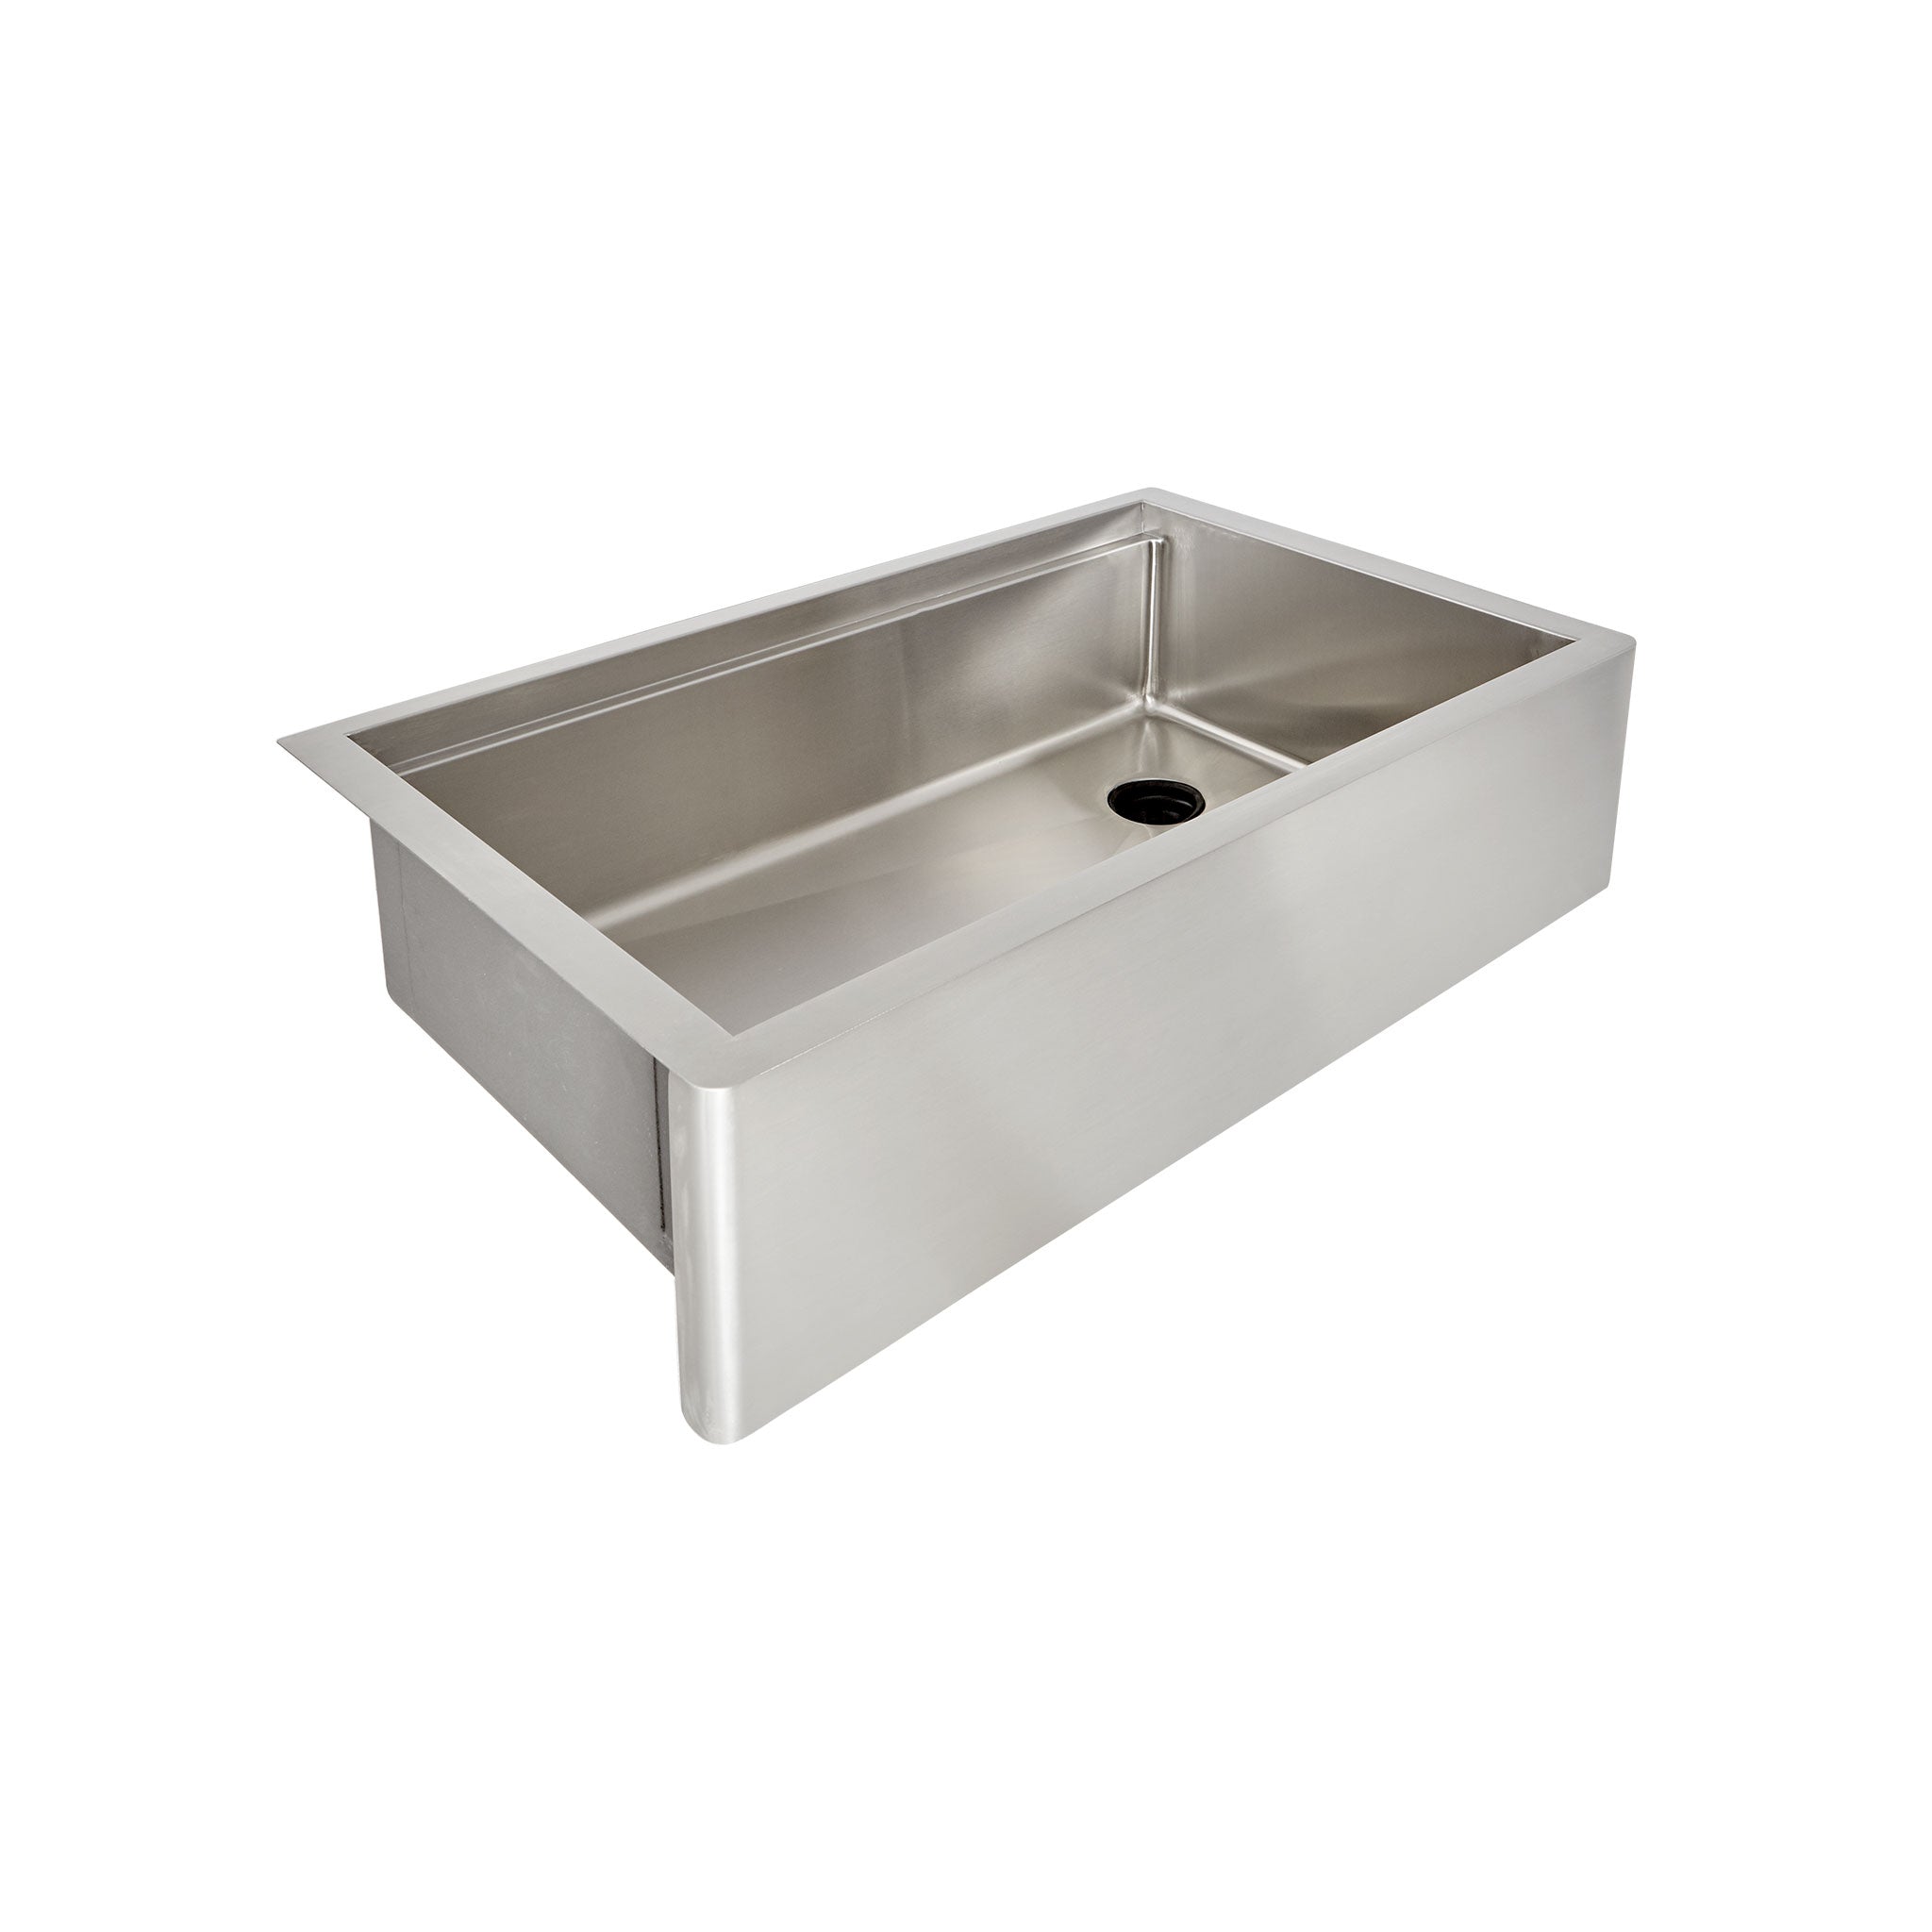 33 inch stainless steel farmhouse sink with workstation ledge and offset drain.